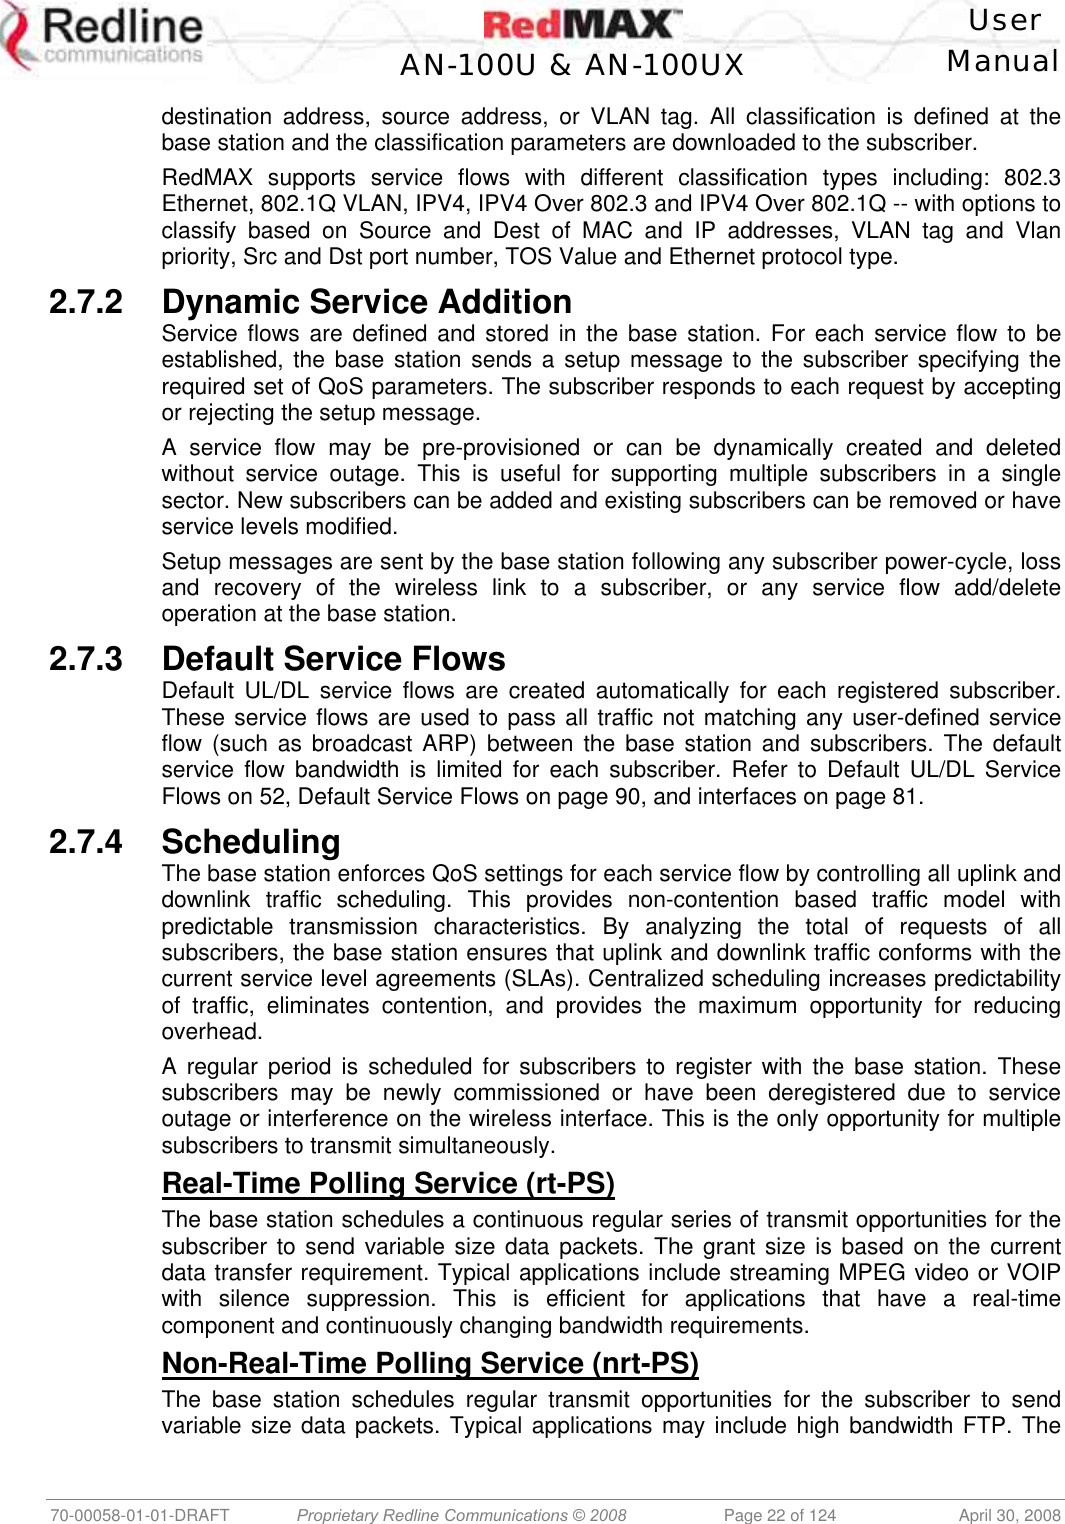    User  AN-100U &amp; AN-100UX Manual   70-00058-01-01-DRAFT  Proprietary Redline Communications © 2008   Page 22 of 124  April 30, 2008 destination address, source address, or VLAN tag. All classification is defined at the base station and the classification parameters are downloaded to the subscriber. RedMAX supports service flows with different classification types including: 802.3 Ethernet, 802.1Q VLAN, IPV4, IPV4 Over 802.3 and IPV4 Over 802.1Q -- with options to classify based on Source and Dest of MAC and IP addresses, VLAN tag and Vlan priority, Src and Dst port number, TOS Value and Ethernet protocol type. 2.7.2  Dynamic Service Addition Service flows are defined and stored in the base station. For each service flow to be established, the base station sends a setup message to the subscriber specifying the required set of QoS parameters. The subscriber responds to each request by accepting or rejecting the setup message.  A service flow may be pre-provisioned or can be dynamically created and deleted without service outage. This is useful for supporting multiple subscribers in a single sector. New subscribers can be added and existing subscribers can be removed or have service levels modified. Setup messages are sent by the base station following any subscriber power-cycle, loss and recovery of the wireless link to a subscriber, or any service flow add/delete operation at the base station.  2.7.3 Default Service Flows Default UL/DL service flows are created automatically for each registered subscriber. These service flows are used to pass all traffic not matching any user-defined service flow (such as broadcast ARP) between the base station and subscribers. The default service flow bandwidth is limited for each subscriber. Refer to Default UL/DL Service Flows on 52, Default Service Flows on page 90, and interfaces on page 81. 2.7.4 Scheduling The base station enforces QoS settings for each service flow by controlling all uplink and downlink traffic scheduling. This provides non-contention based traffic model with predictable transmission characteristics. By analyzing the total of requests of all subscribers, the base station ensures that uplink and downlink traffic conforms with the current service level agreements (SLAs). Centralized scheduling increases predictability of traffic, eliminates contention, and provides the maximum opportunity for reducing overhead. A regular period is scheduled for subscribers to register with the base station. These subscribers may be newly commissioned or have been deregistered due to service outage or interference on the wireless interface. This is the only opportunity for multiple subscribers to transmit simultaneously.  Real-Time Polling Service (rt-PS) The base station schedules a continuous regular series of transmit opportunities for the subscriber to send variable size data packets. The grant size is based on the current data transfer requirement. Typical applications include streaming MPEG video or VOIP with silence suppression. This is efficient for applications that have a real-time component and continuously changing bandwidth requirements. Non-Real-Time Polling Service (nrt-PS) The base station schedules regular transmit opportunities for the subscriber to send variable size data packets. Typical applications may include high bandwidth FTP. The 